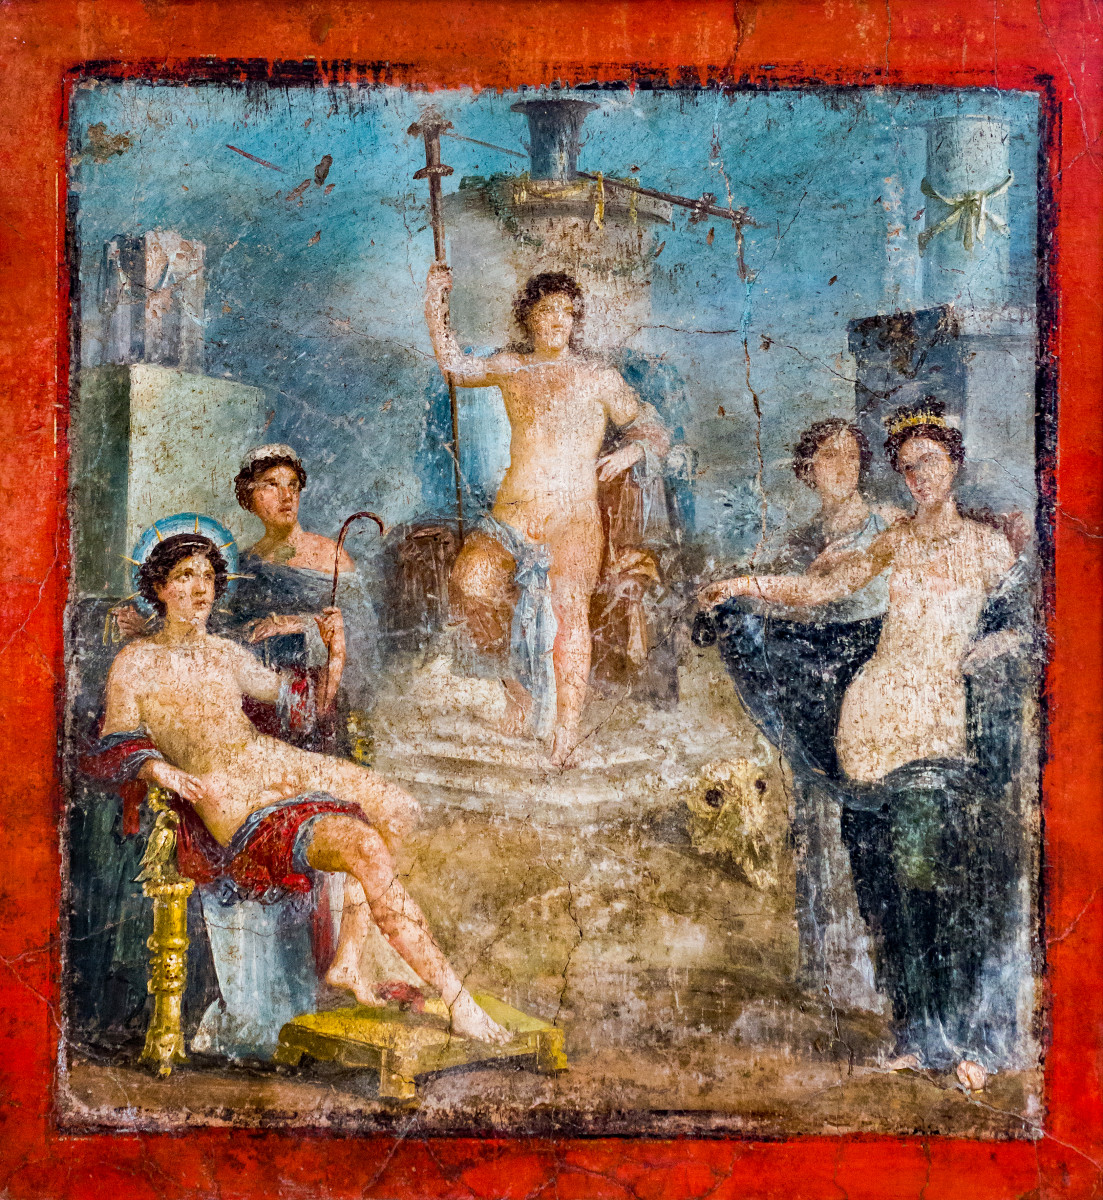 Beardless Dionysos with a long torch sitting on a throne with Helios, Aphrodite, and other gods.